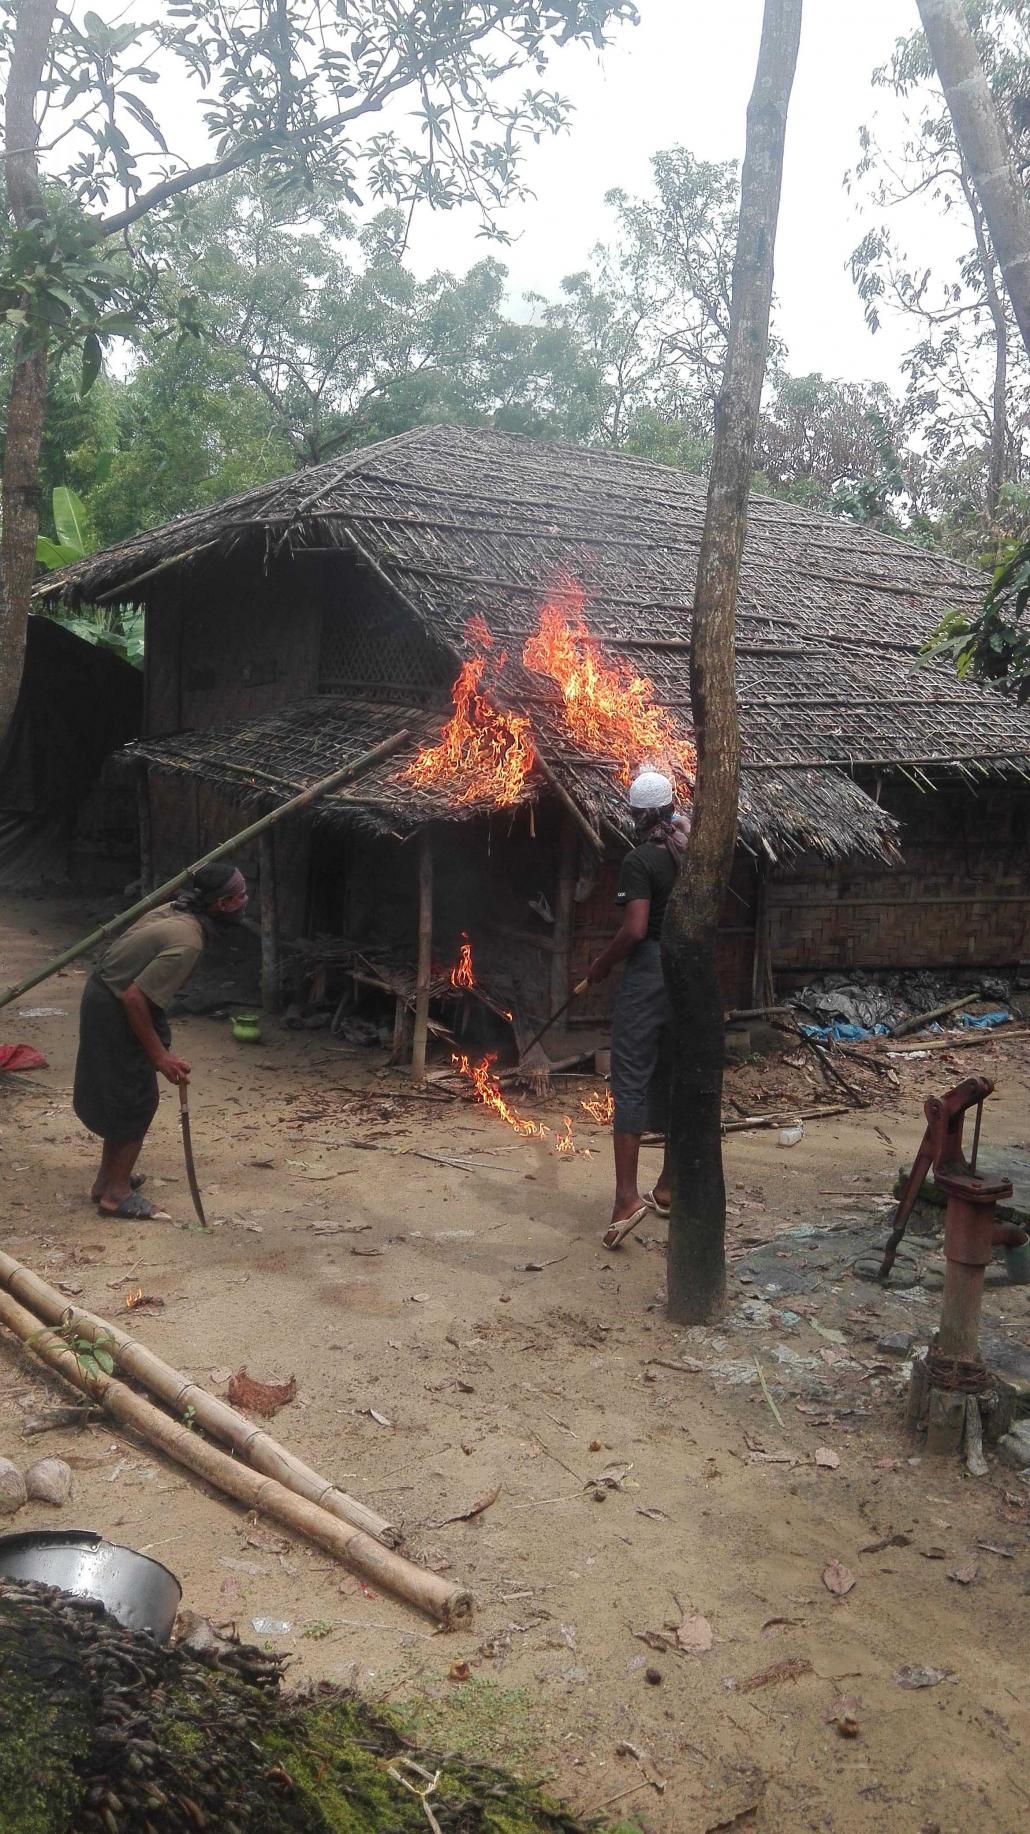 A photo provided to reporters that appeared to show Muslims burning their own homes. Evidence later emerged that the photos were staged. (Supplied)